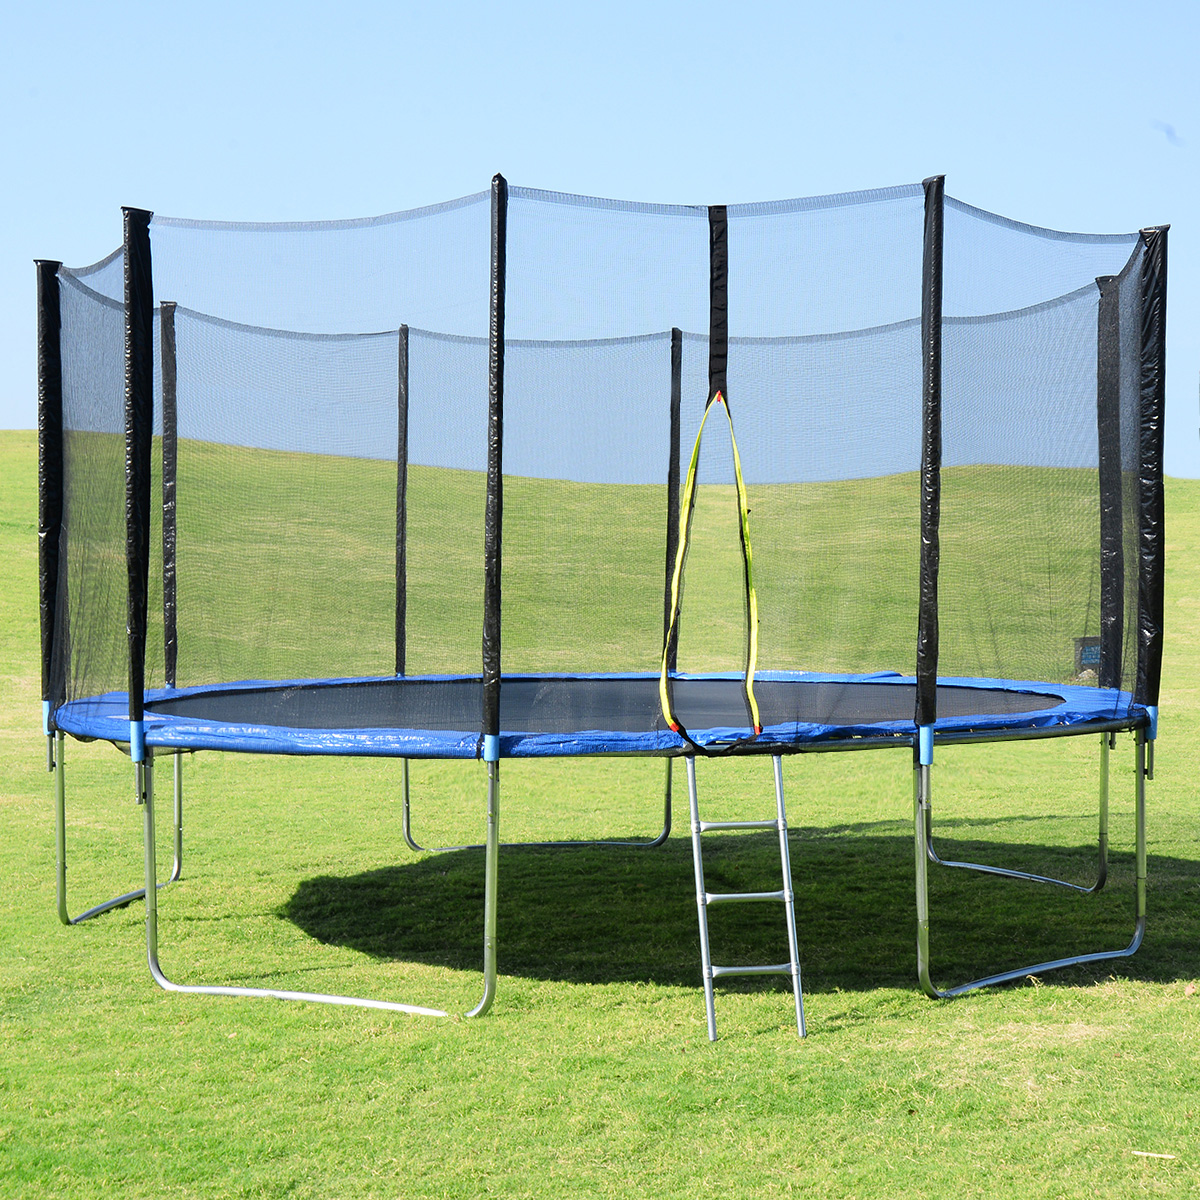 Gymax 15 FT Trampoline Combo Bounce Jump Safety Enclosure Net - image 4 of 10